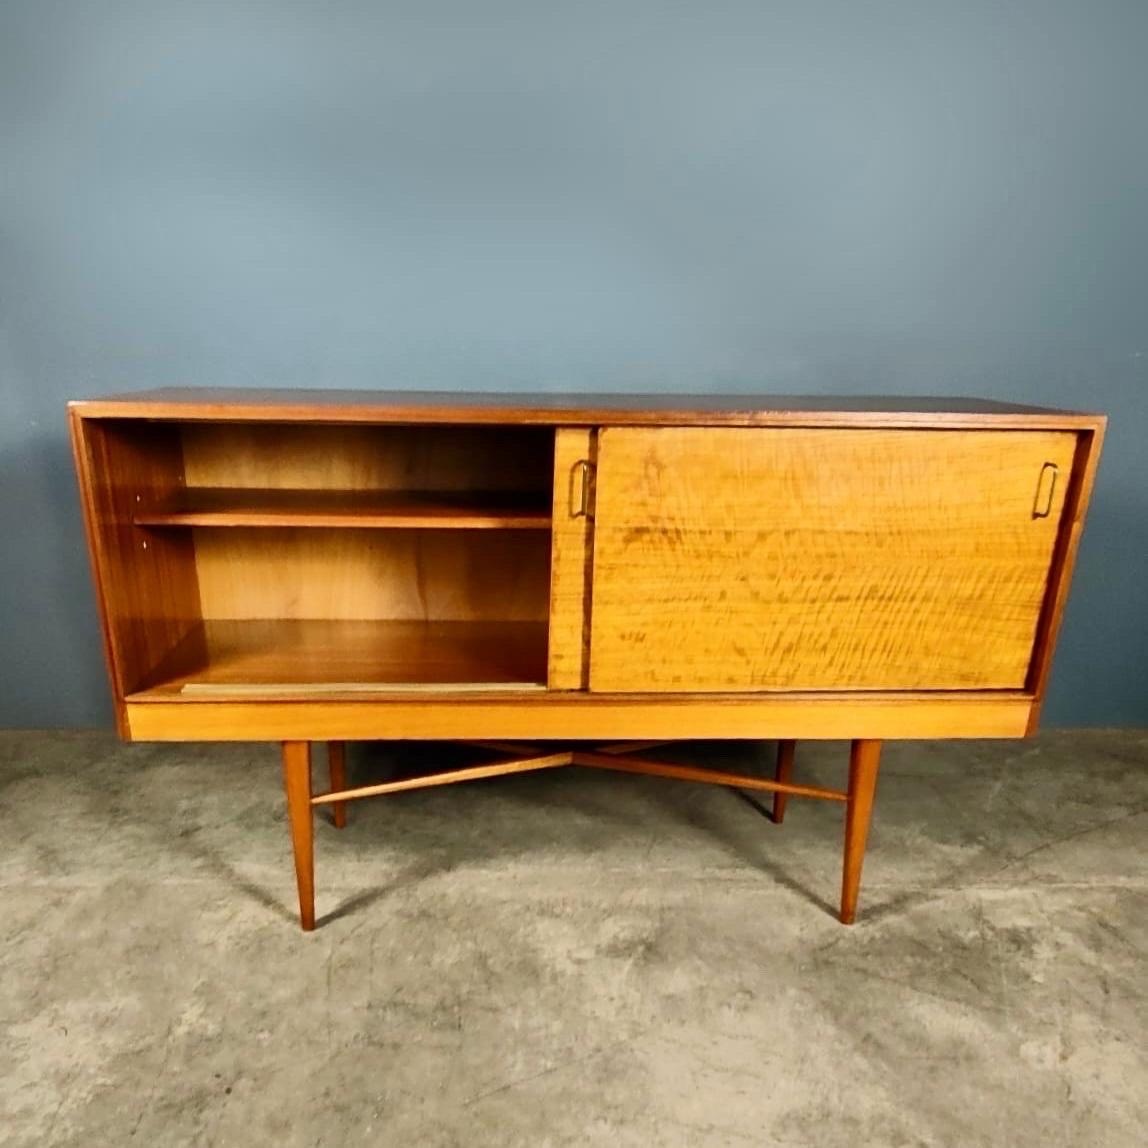 New Stock ✅

Sideboard by Robert Heritage for Heal’s Vintage Mid Century Retro MCM

Made in England, dating from the 1950s, this is a rare and beautiful vintage sideboard by Robert Heritage for Heal’s. As with all Robert Heritage and Heal products